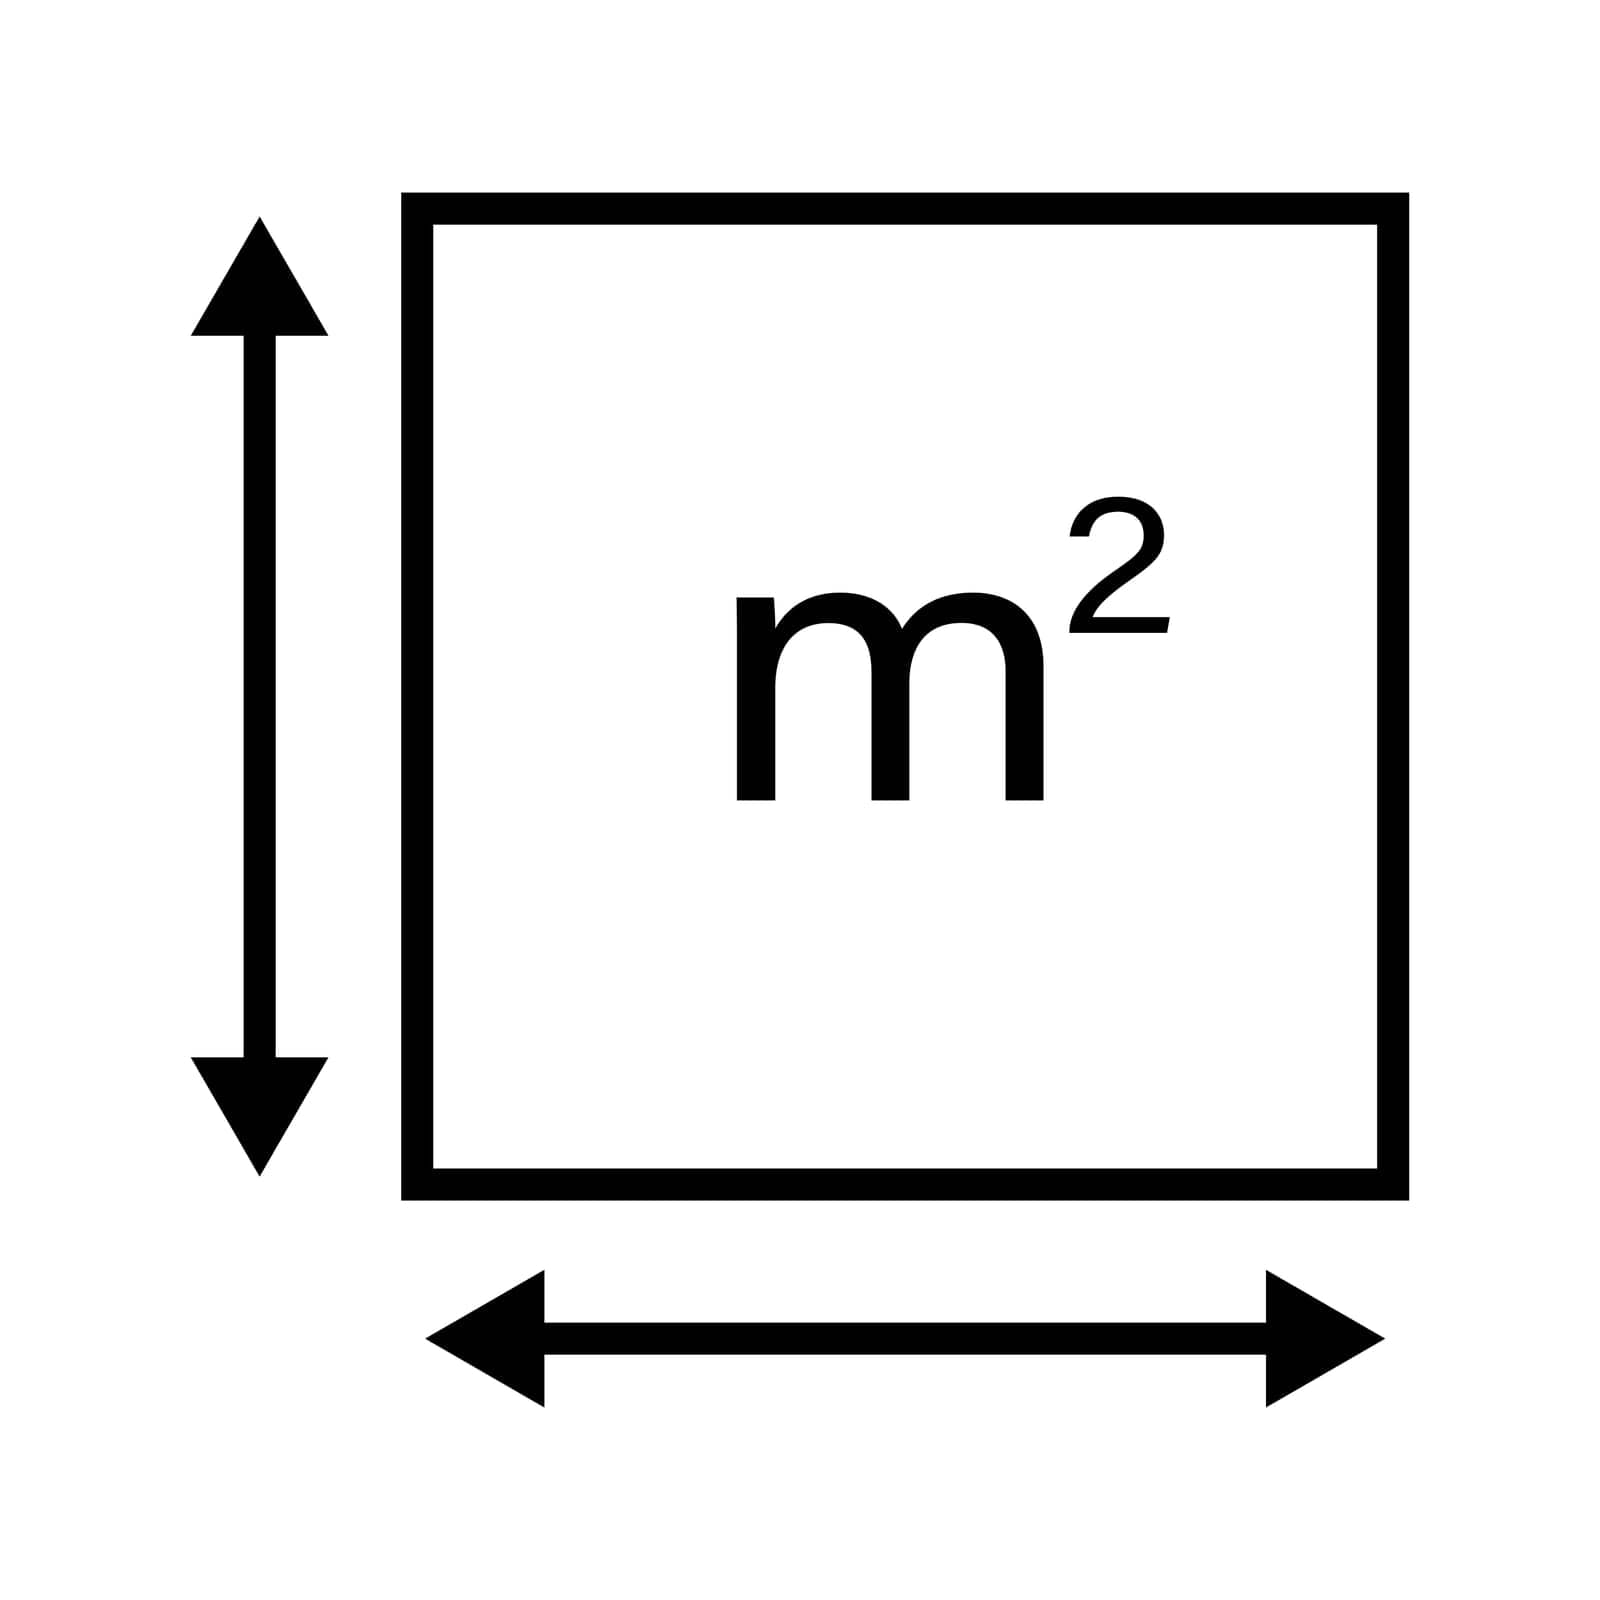 M2 Square meter icon with arrows by misteremil